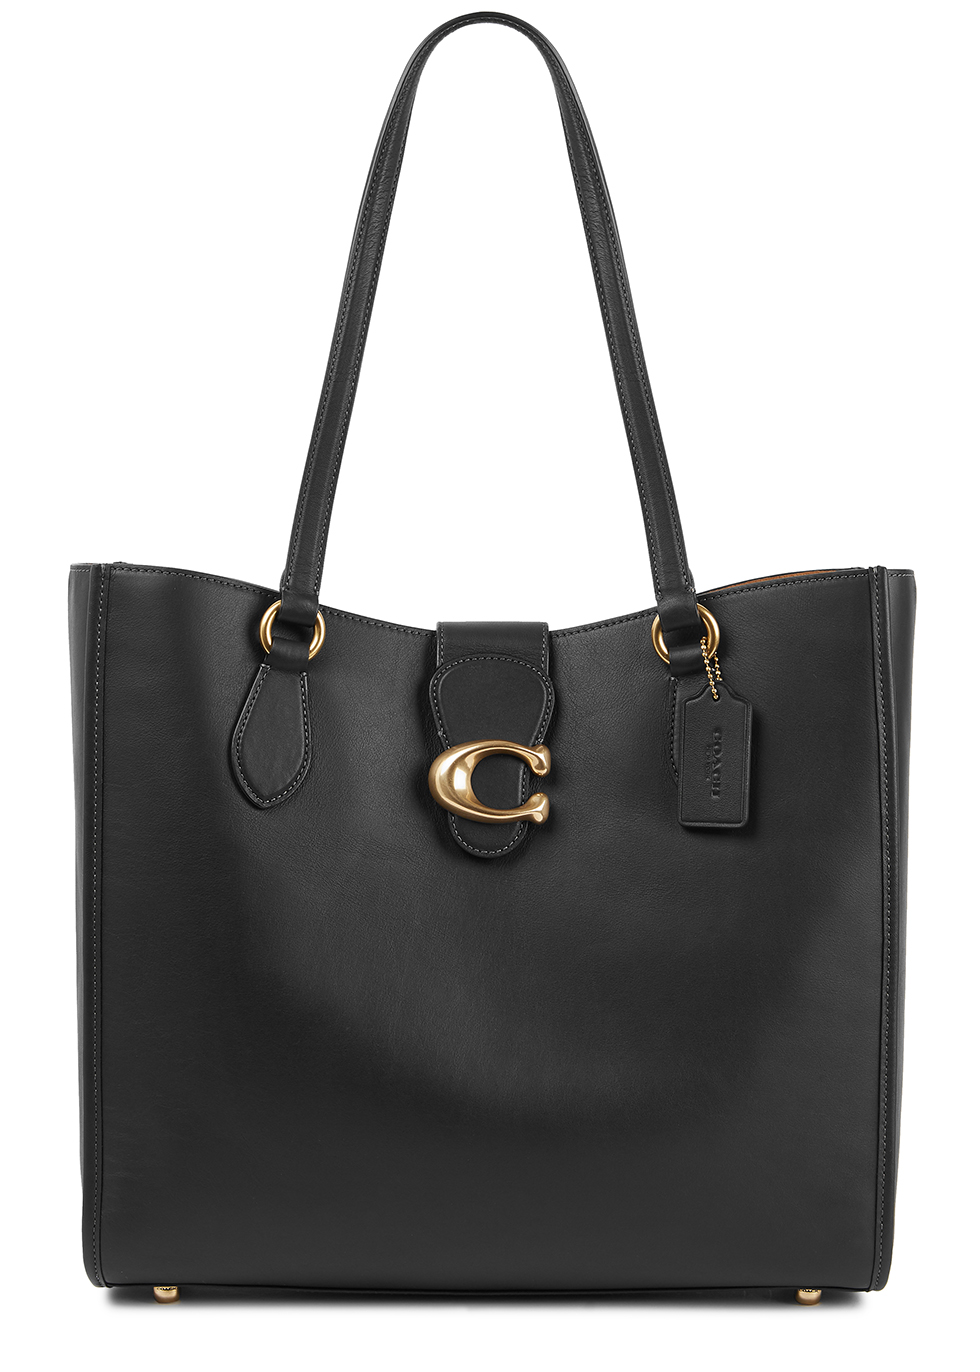 Tabby black leather tote